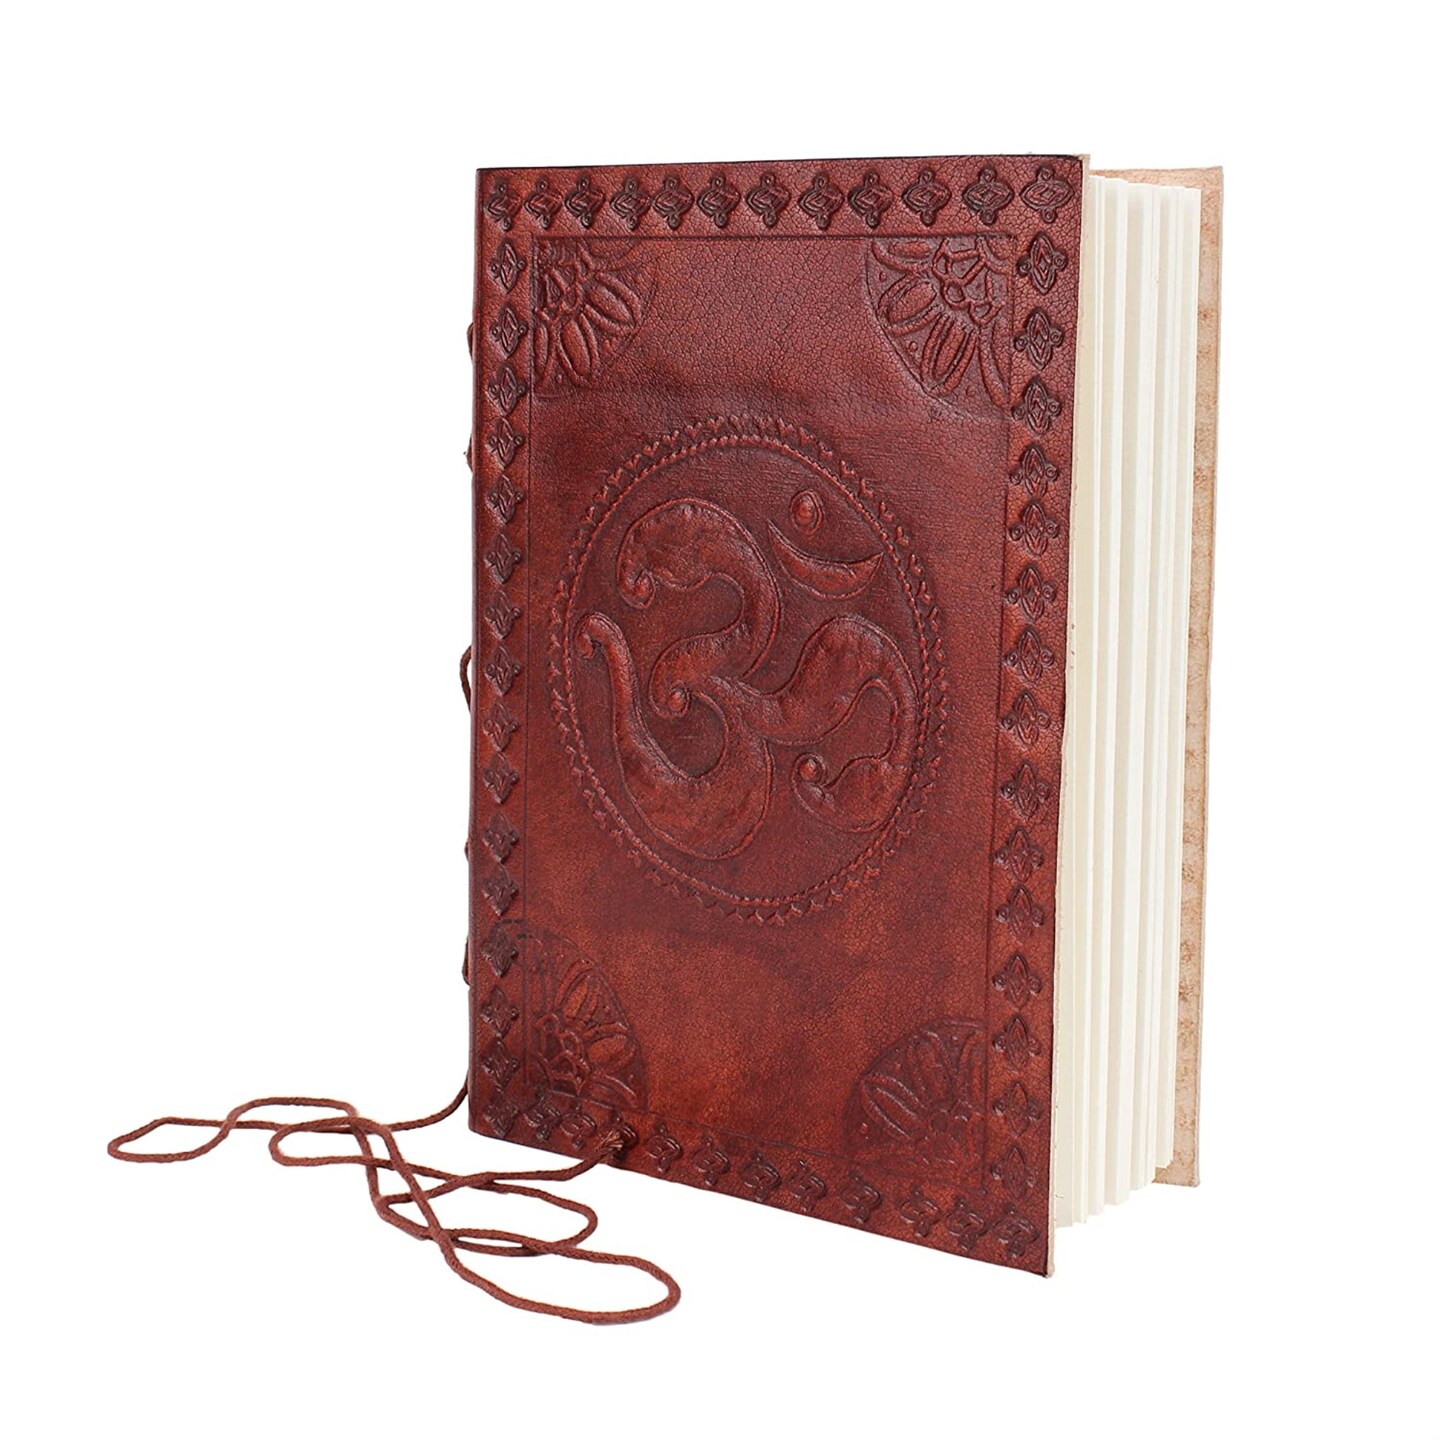 Store Indya Thoughtful Hand Embossed Leather Journal Travel Pocket Personal Diary (7 x 5) with Peace OM Symbol and Handmade Paper